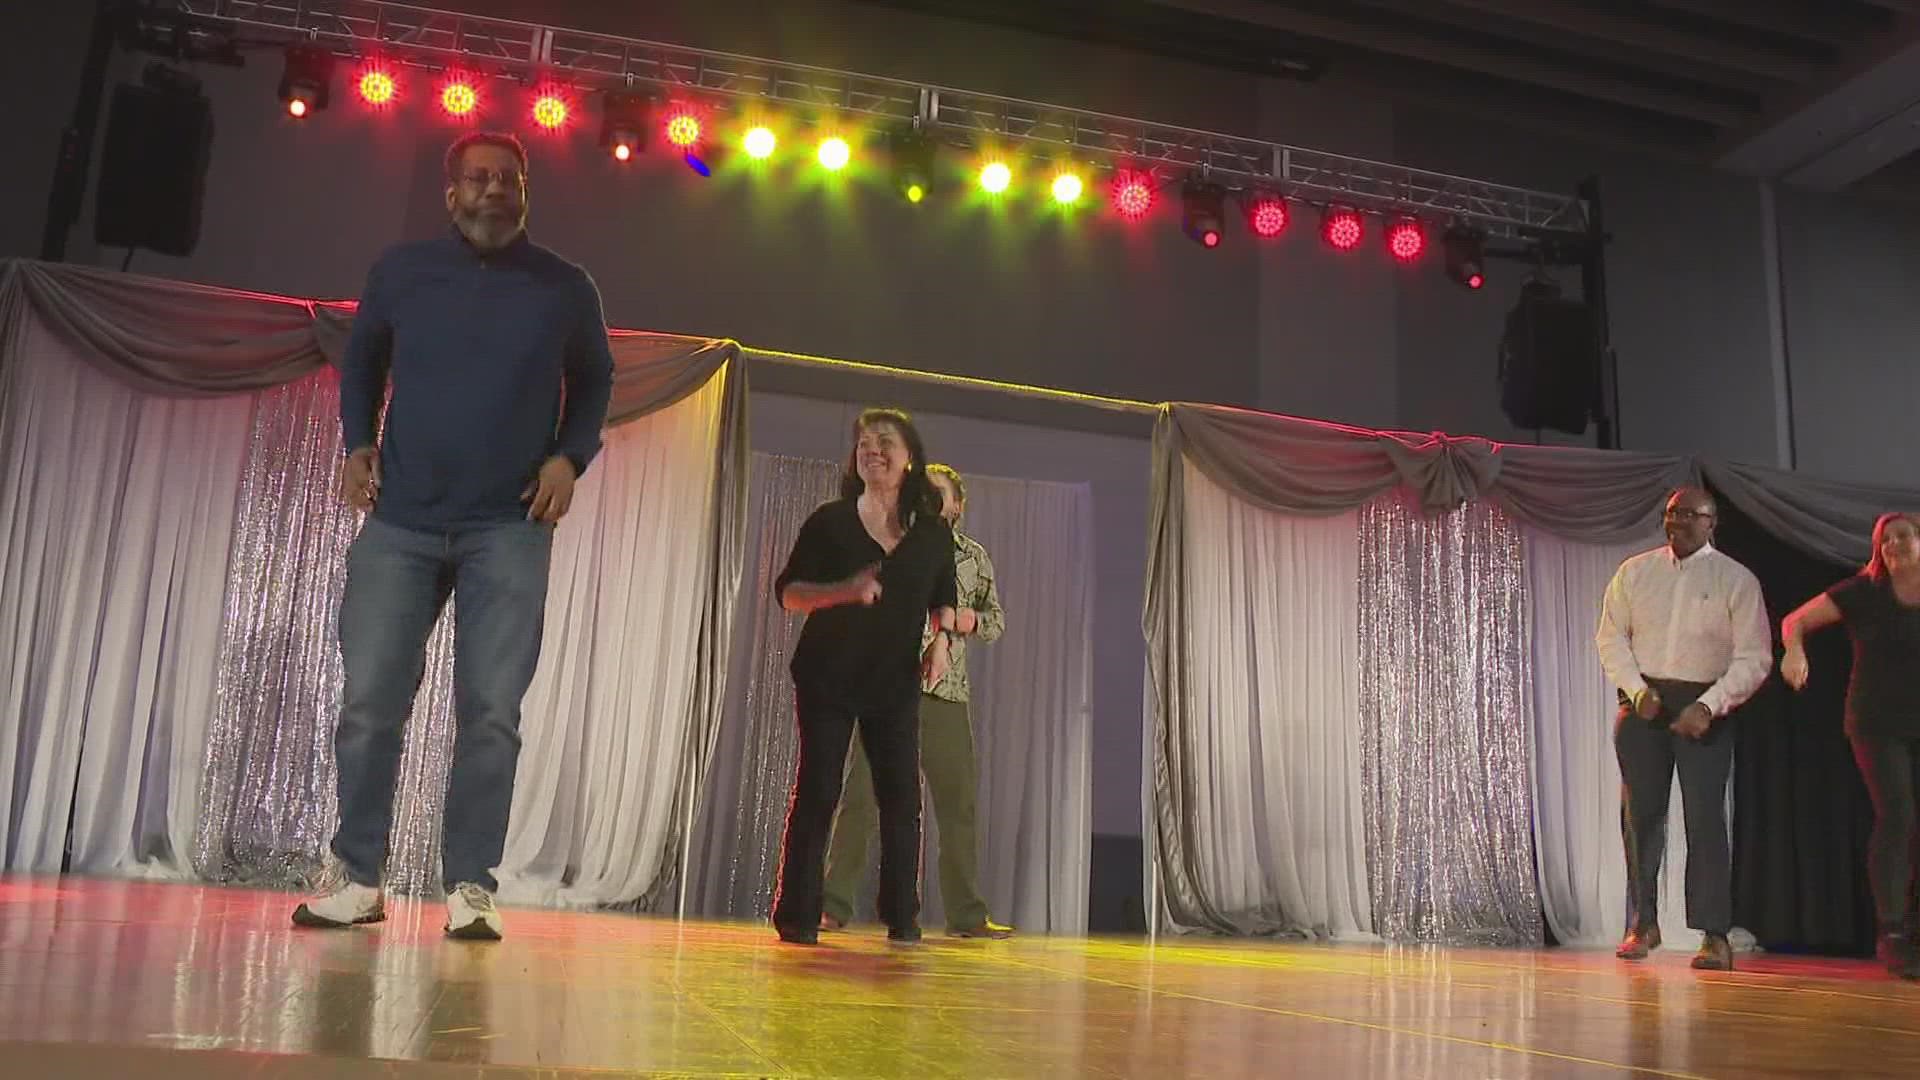 It's the first live "Dancing with the Local Stars" event since 2019. Tickets are still available for the Saturday matinee show.